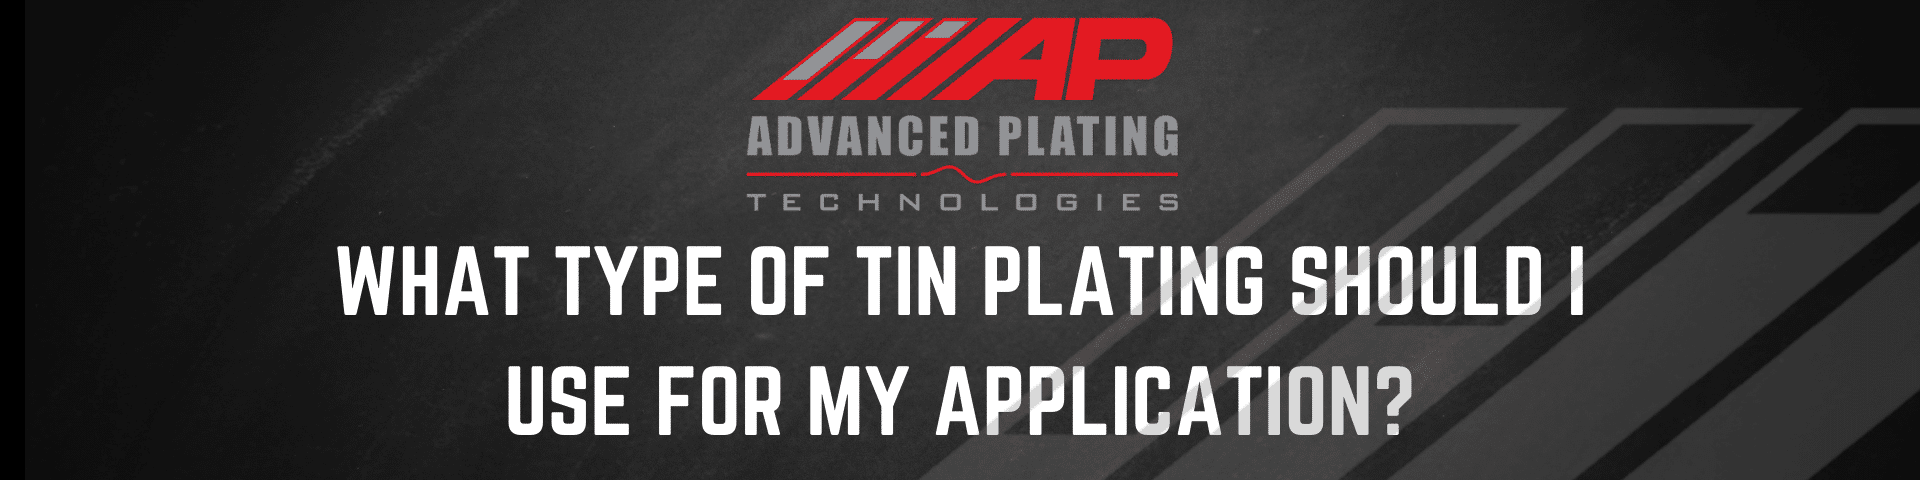 What type of tin plating should I use for my application?